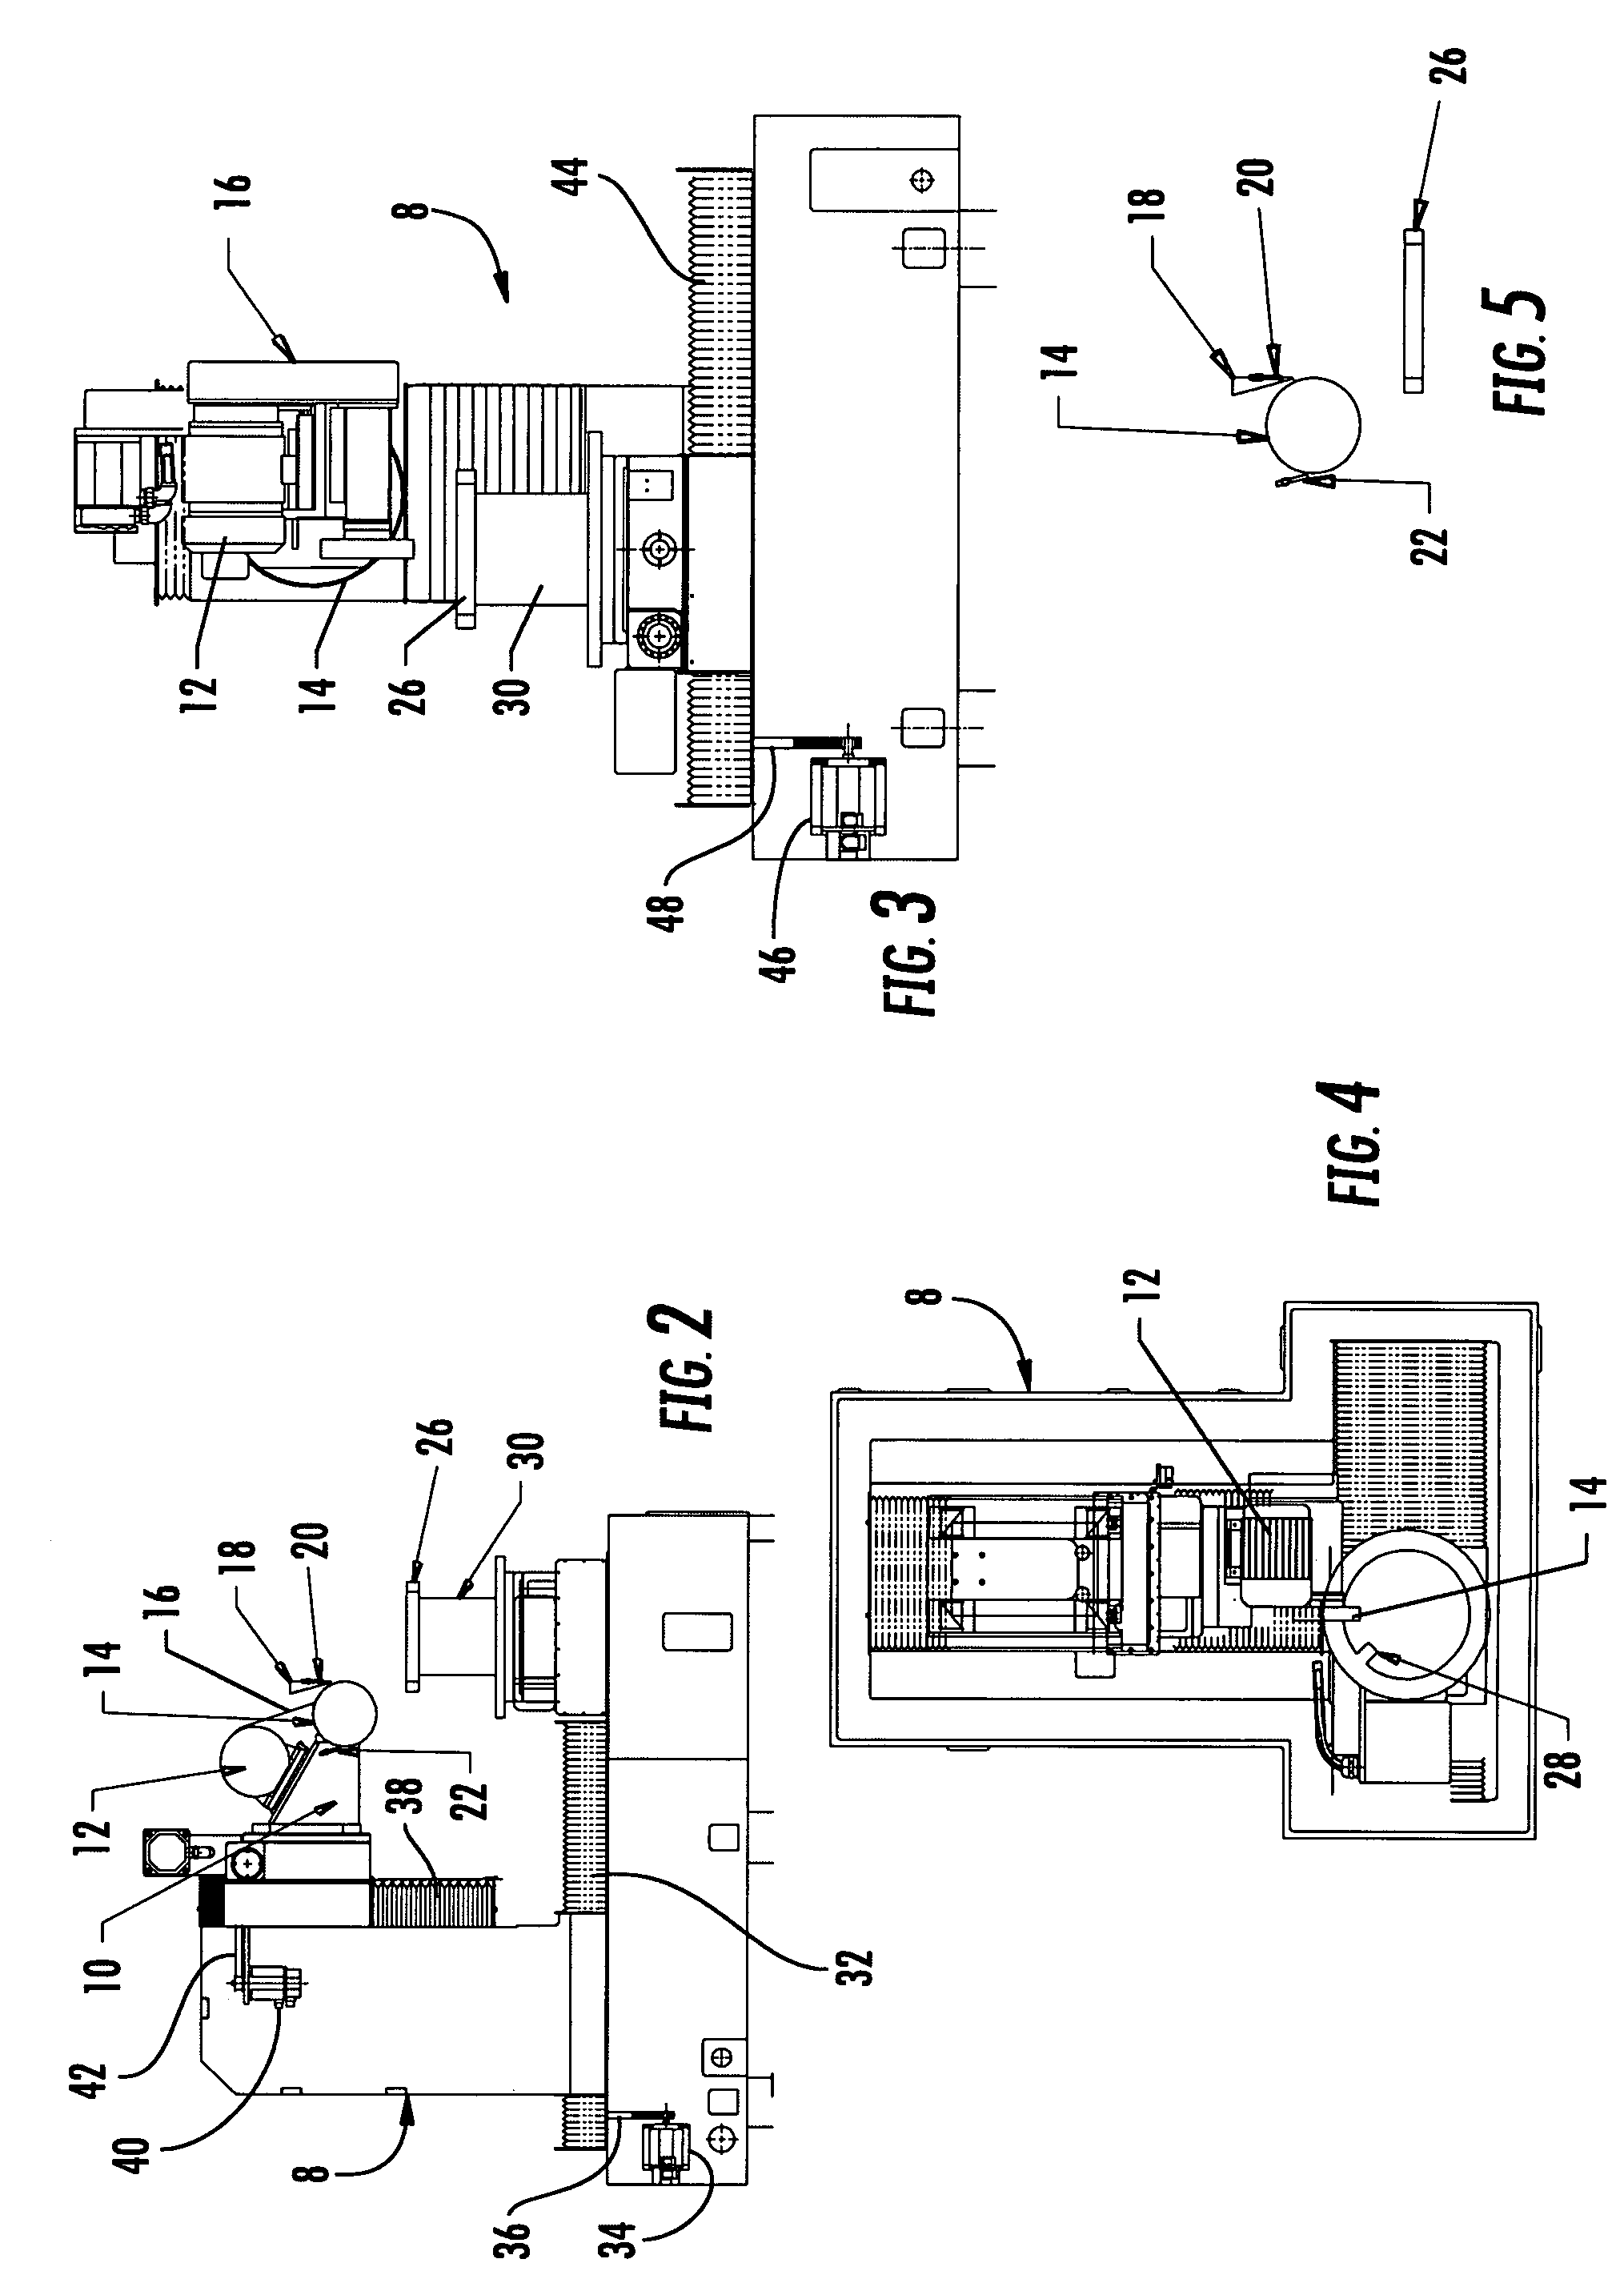 Method and apparatus for grinding a workpiece